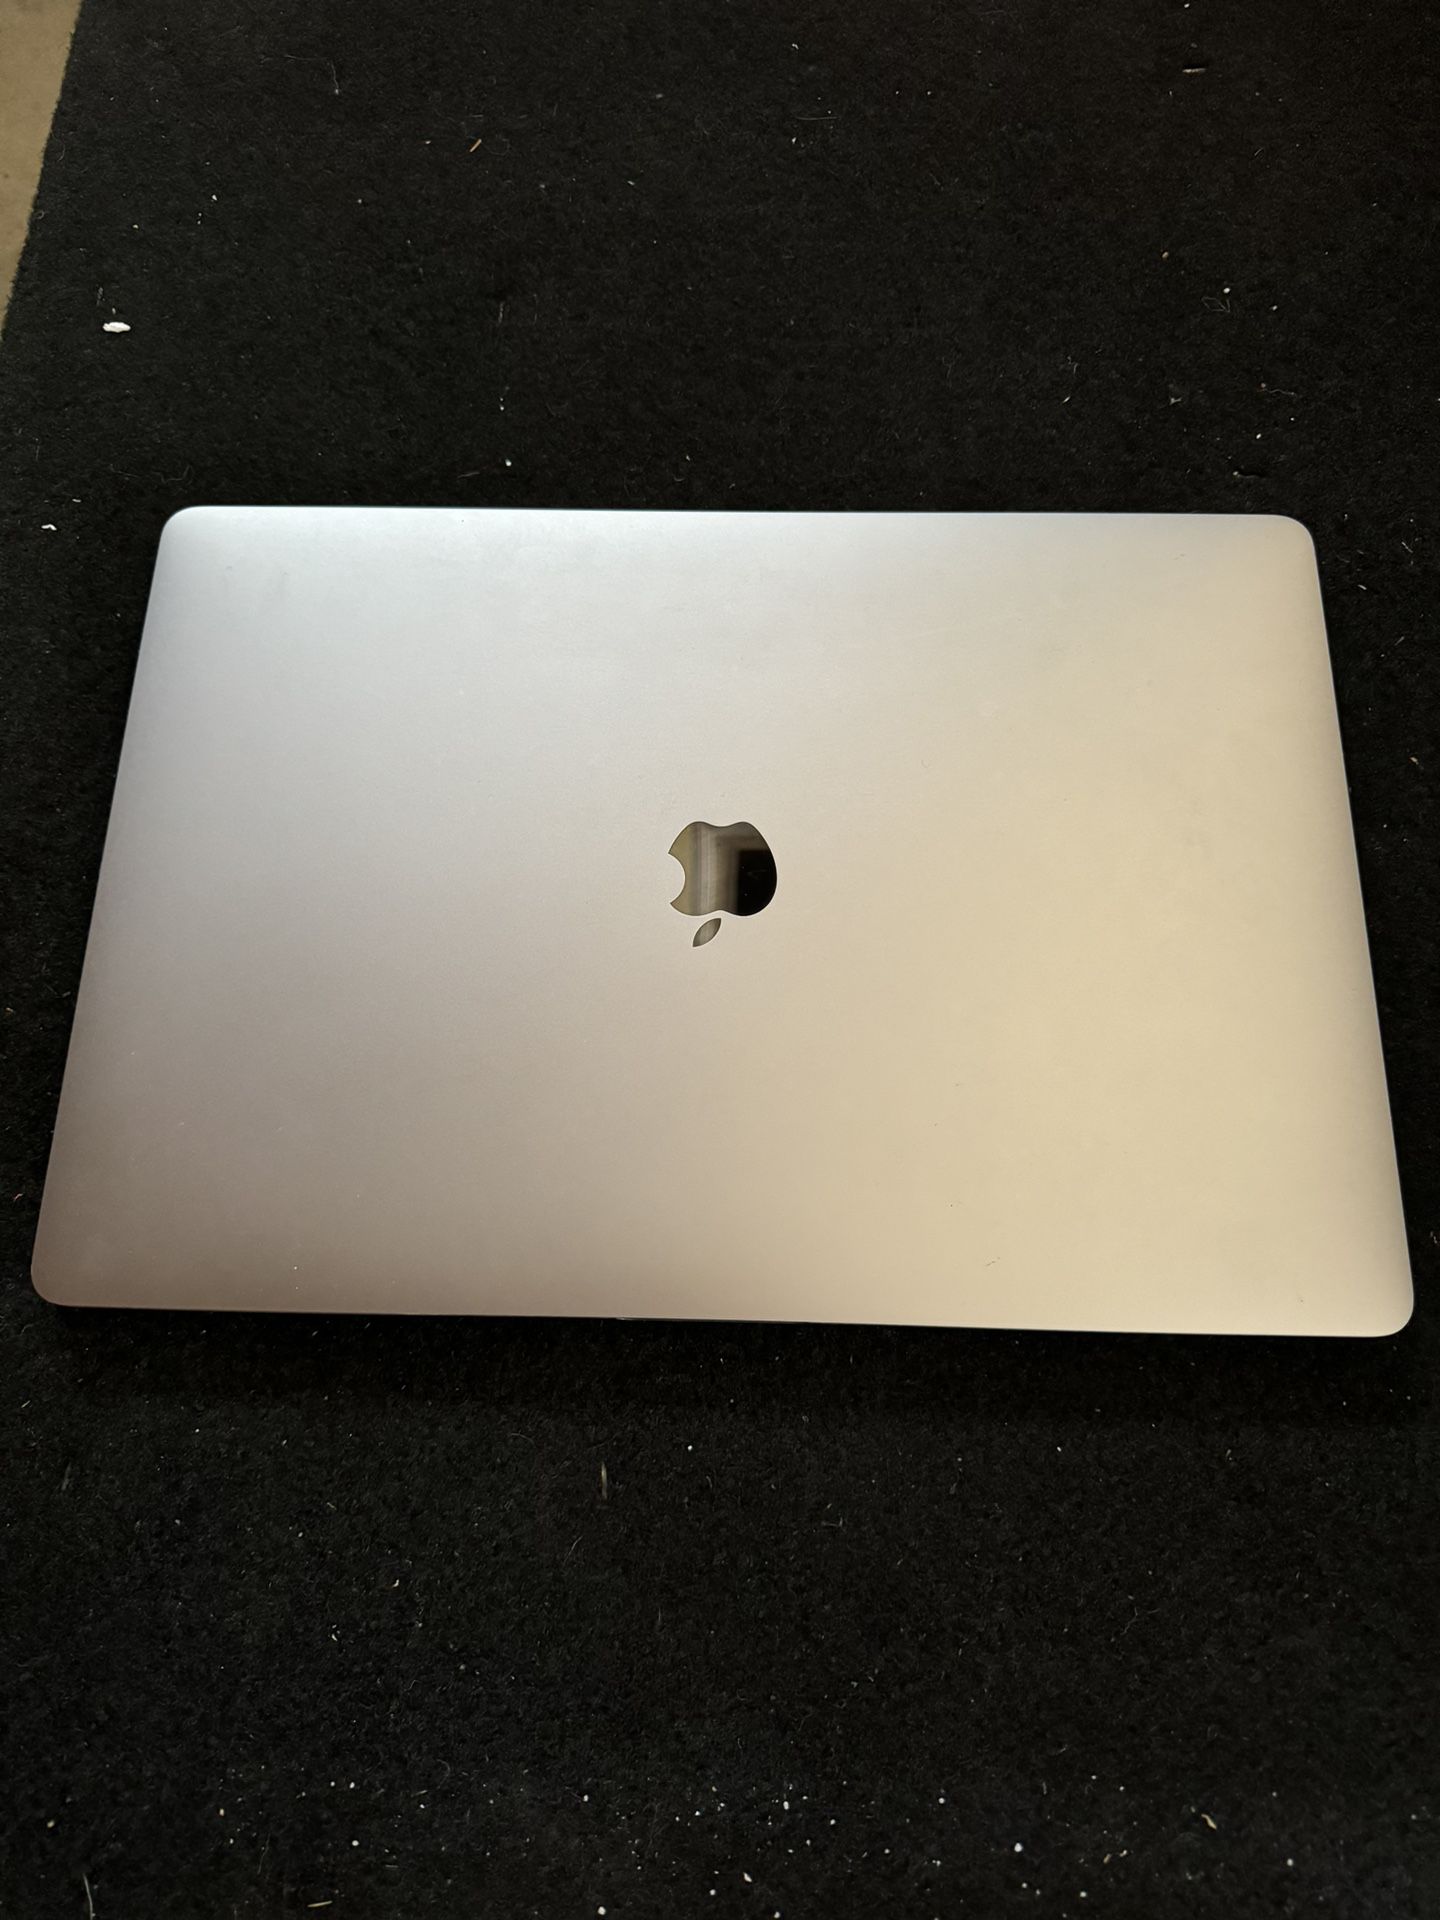 2019 Apple MacBook Pro 16 Inch Great Condition!